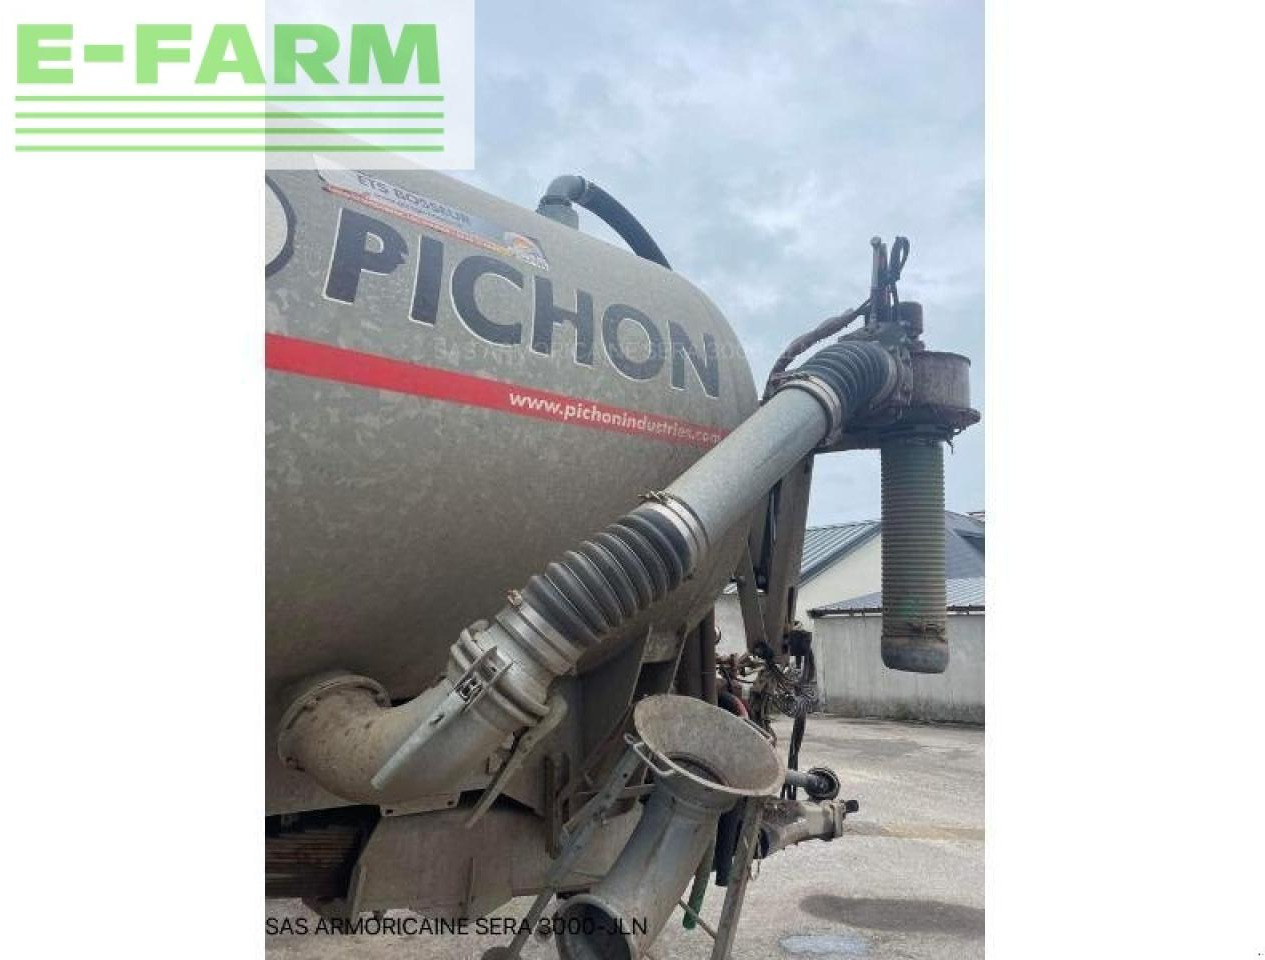 Tractor Pichon tci 18500: afbeelding 5